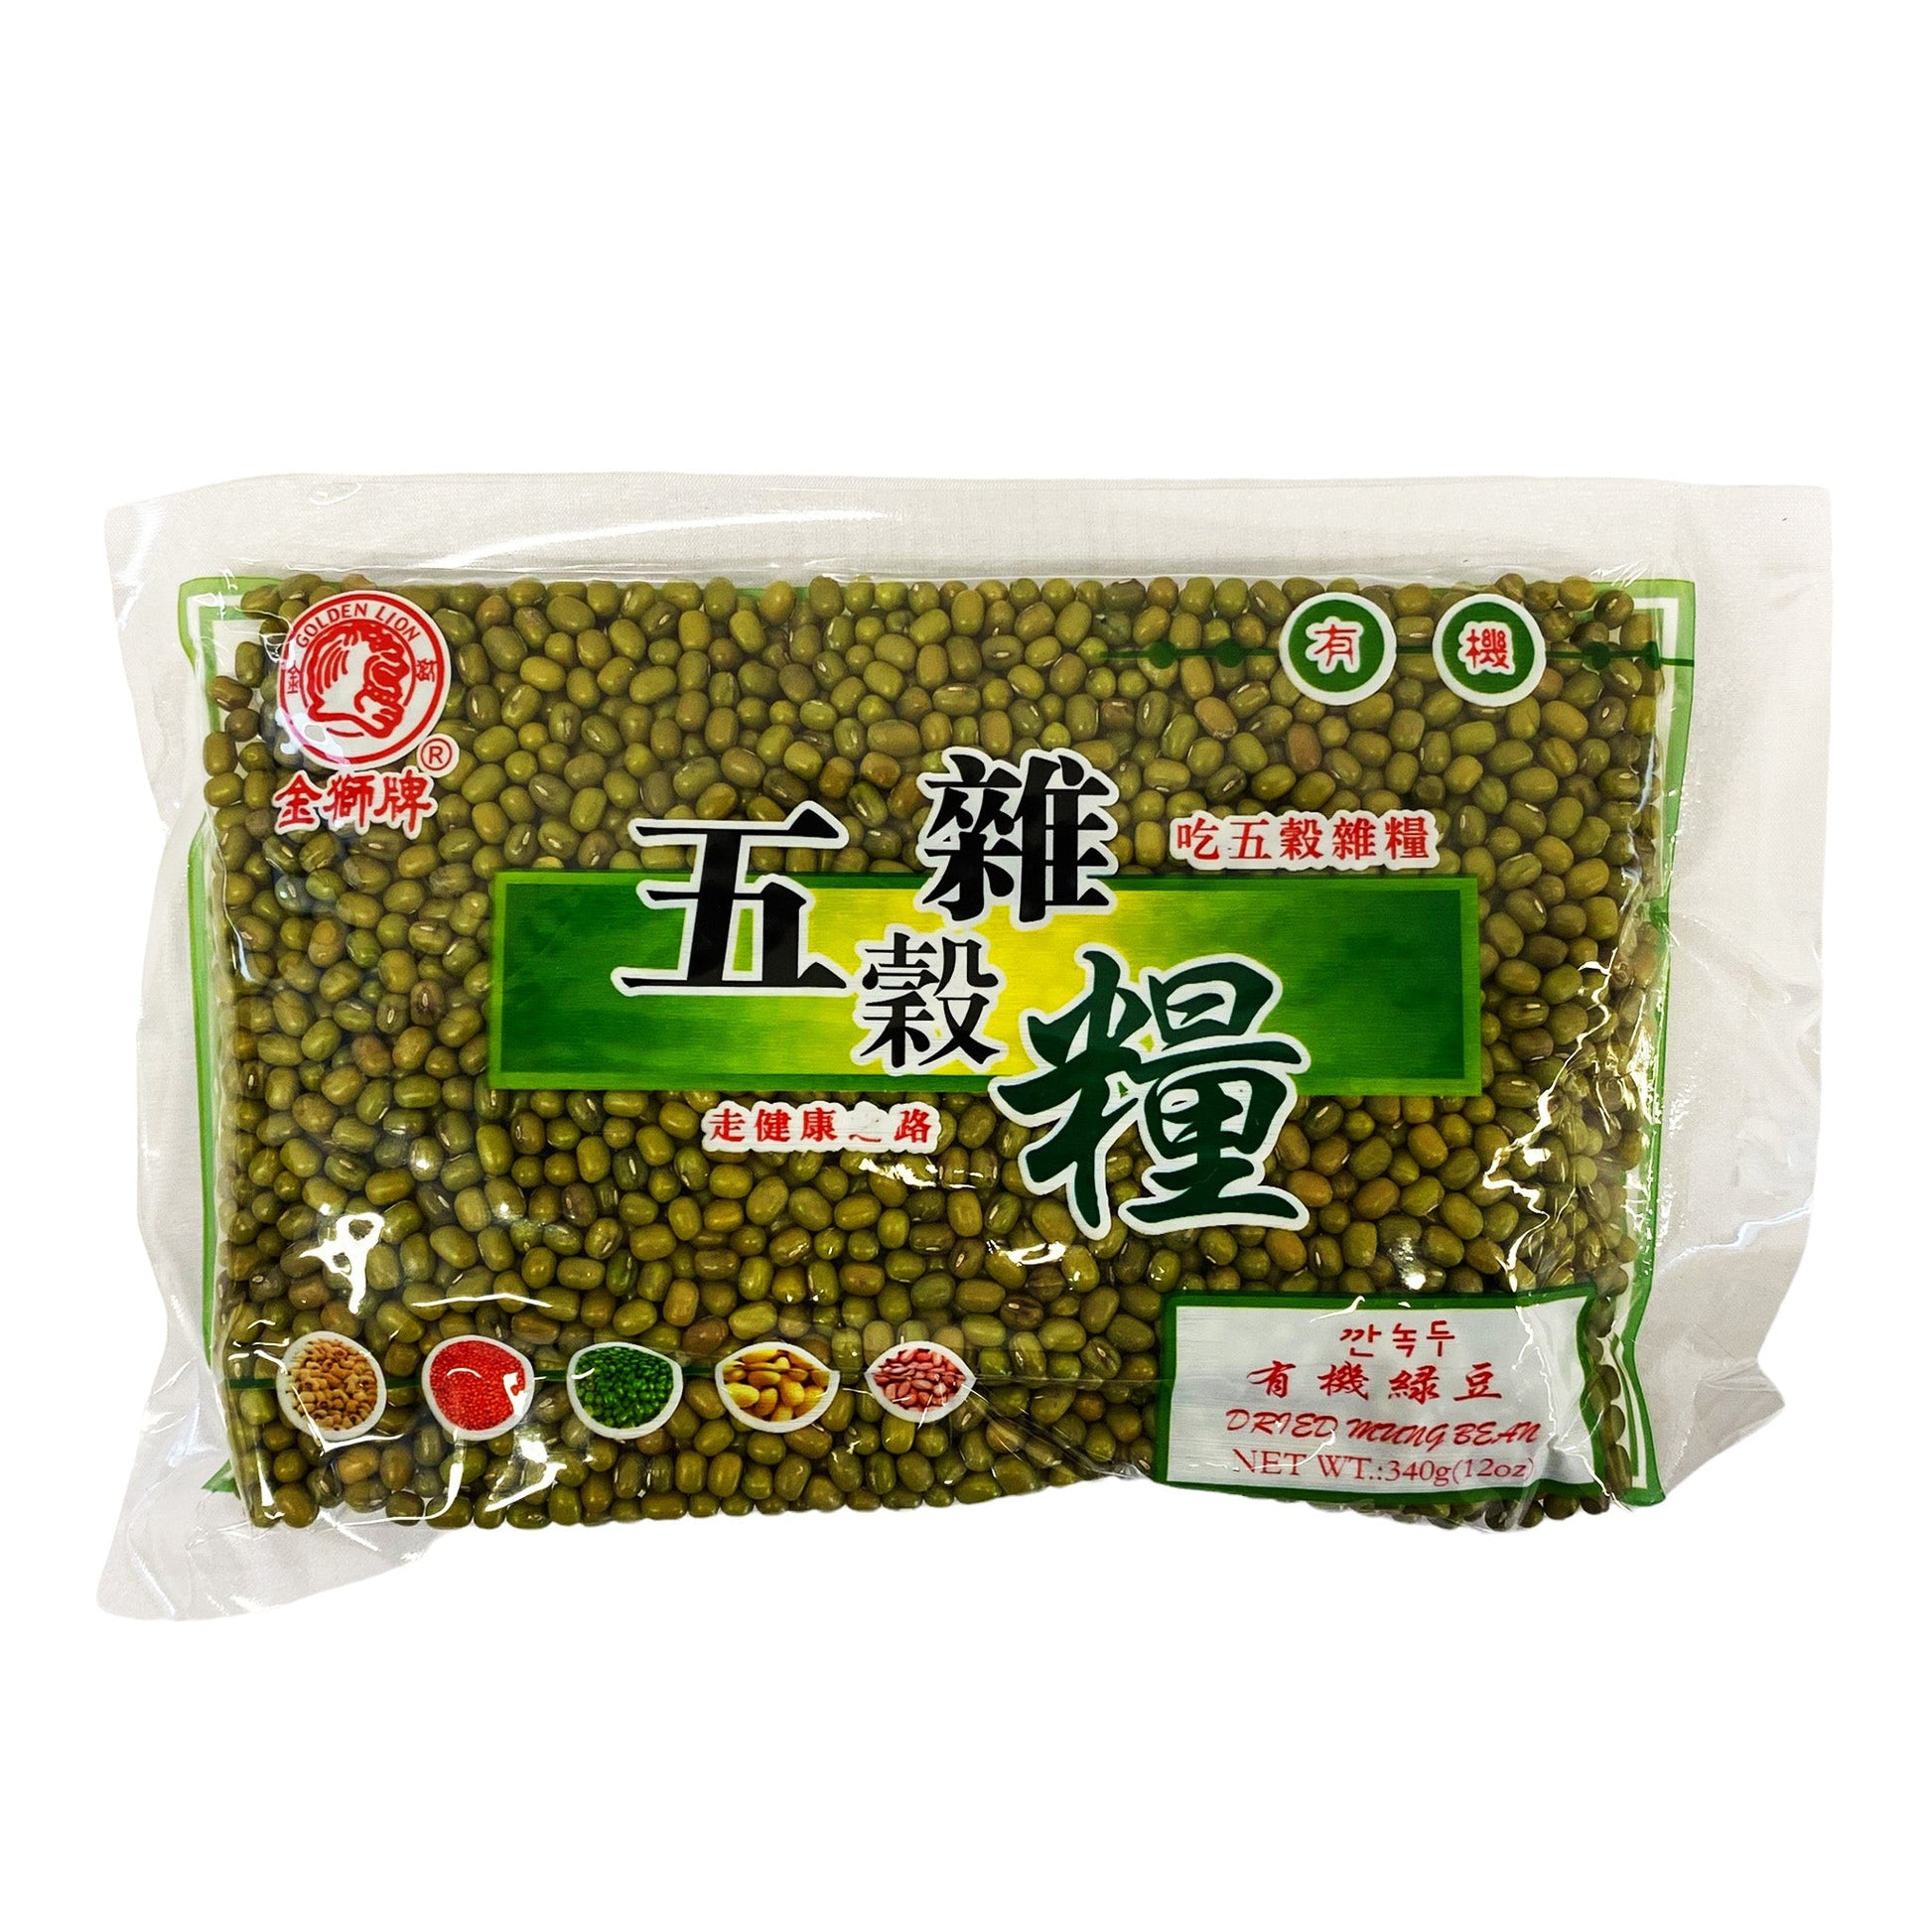 Front graphic view of Golden Lion Dried Mung Bean 12oz